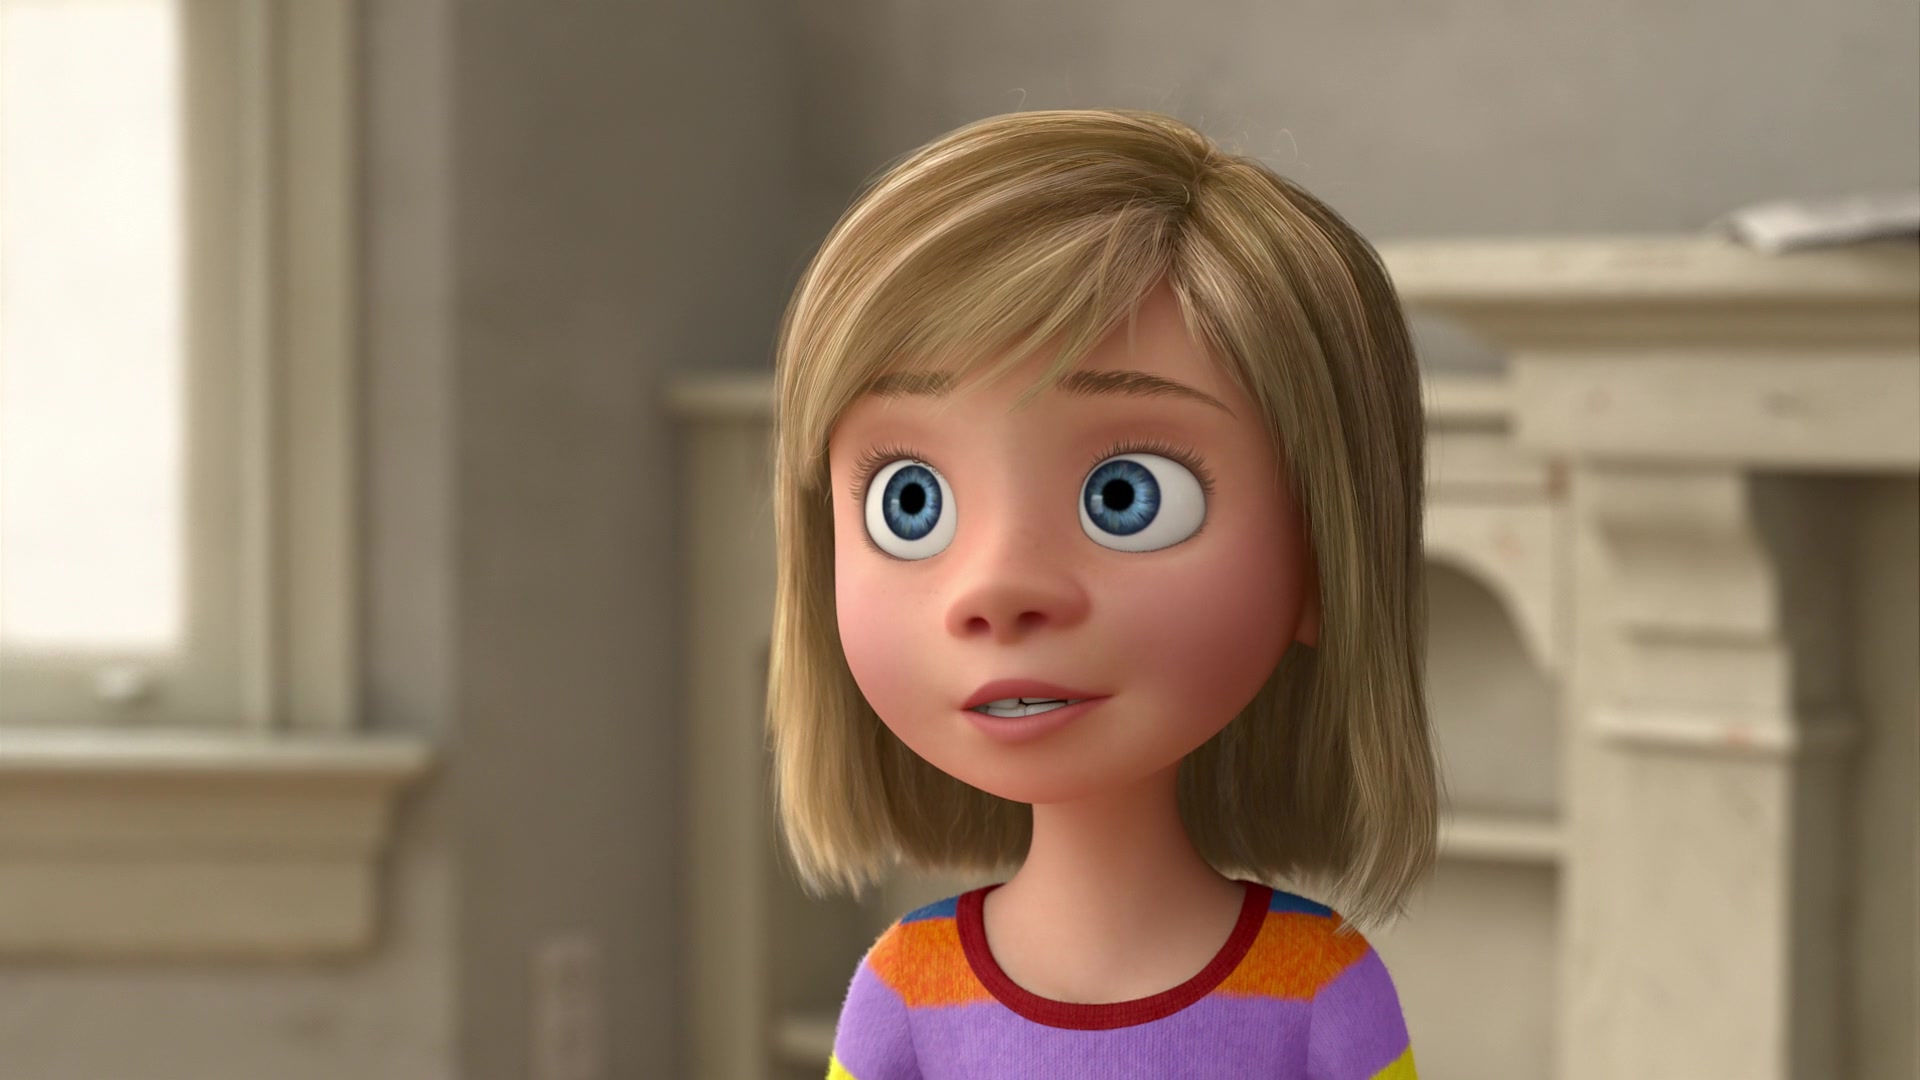 Inside Out Images. 